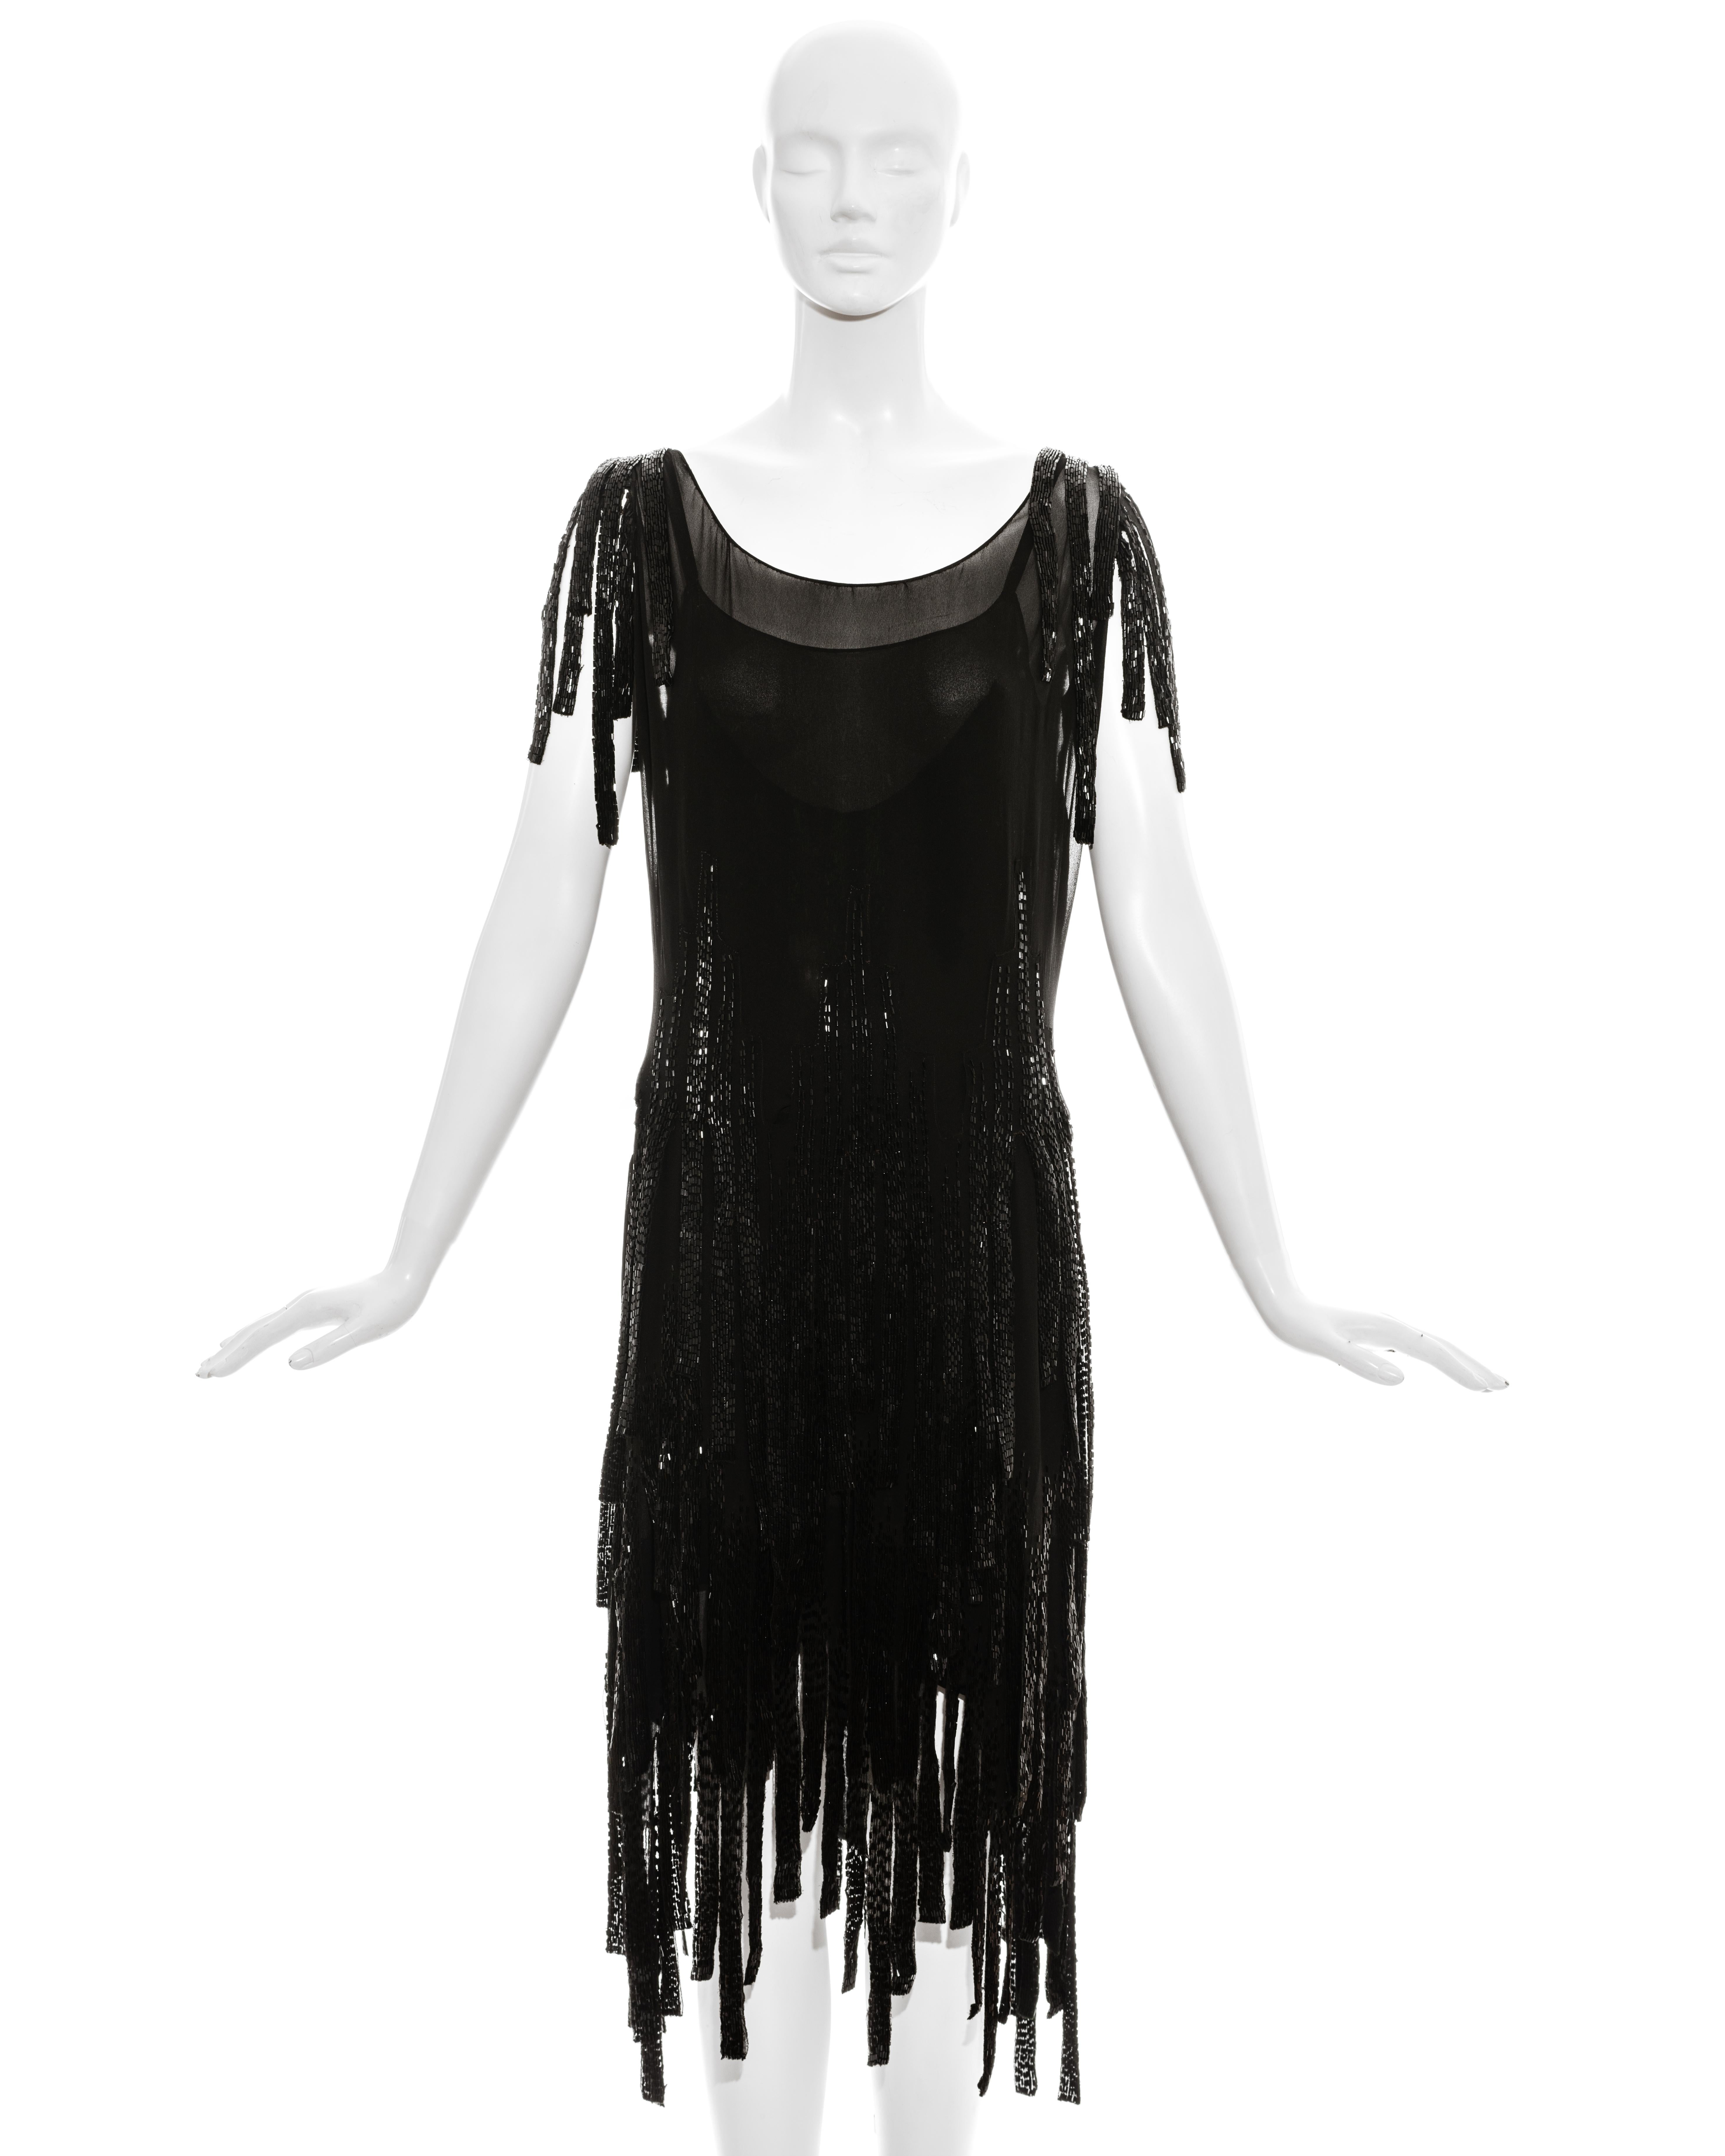 Gabrielle Chanel couture black silk flapper dress comprising two shifts with glass beaded hanging strands around shoulders and skirt.  Classic 1920s style with drop waist. 

c. 1924-1926

* Condition report upon request 